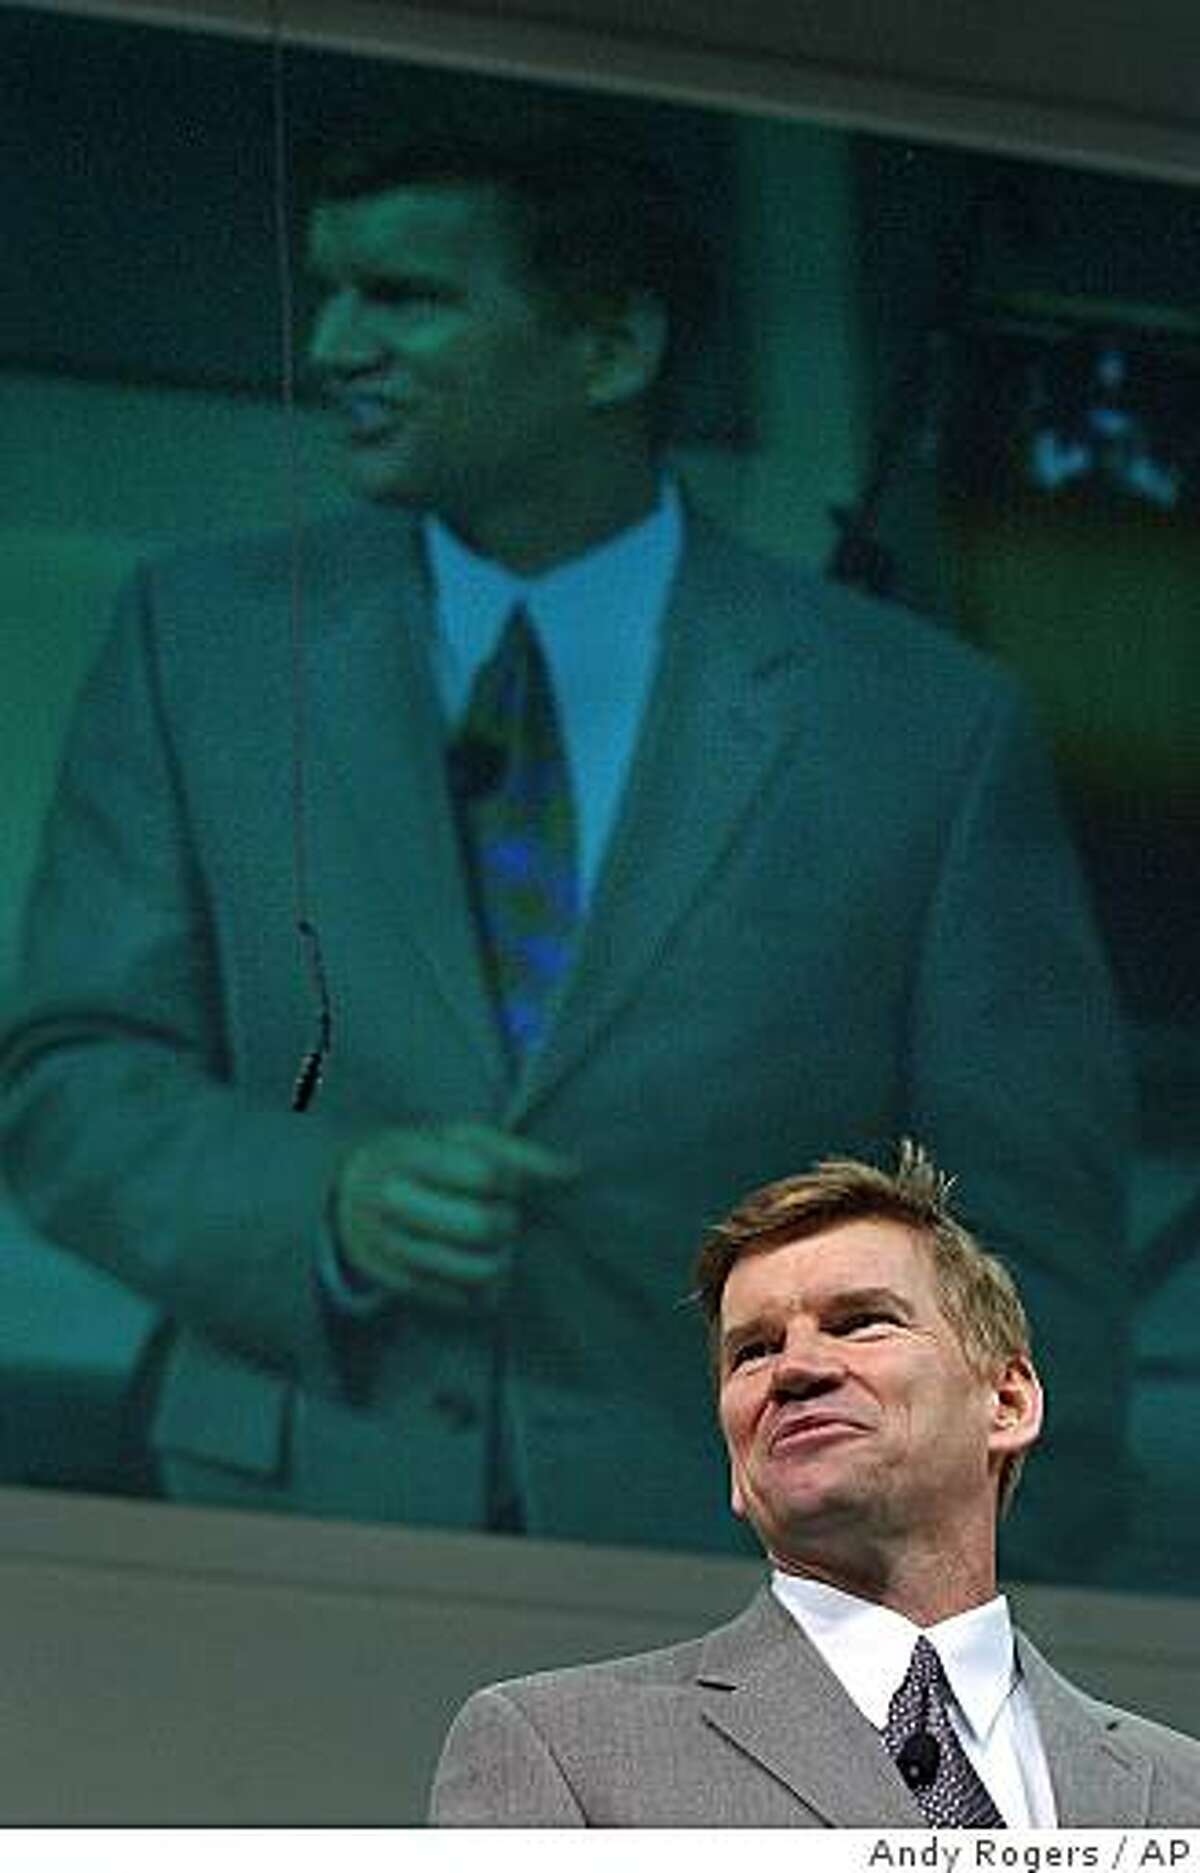 Below a live video feed of himself, the Rev. Ted Haggard delivers a sermon to those gathered at the New Life Church in Colorado Springs, Colo., in 2002.